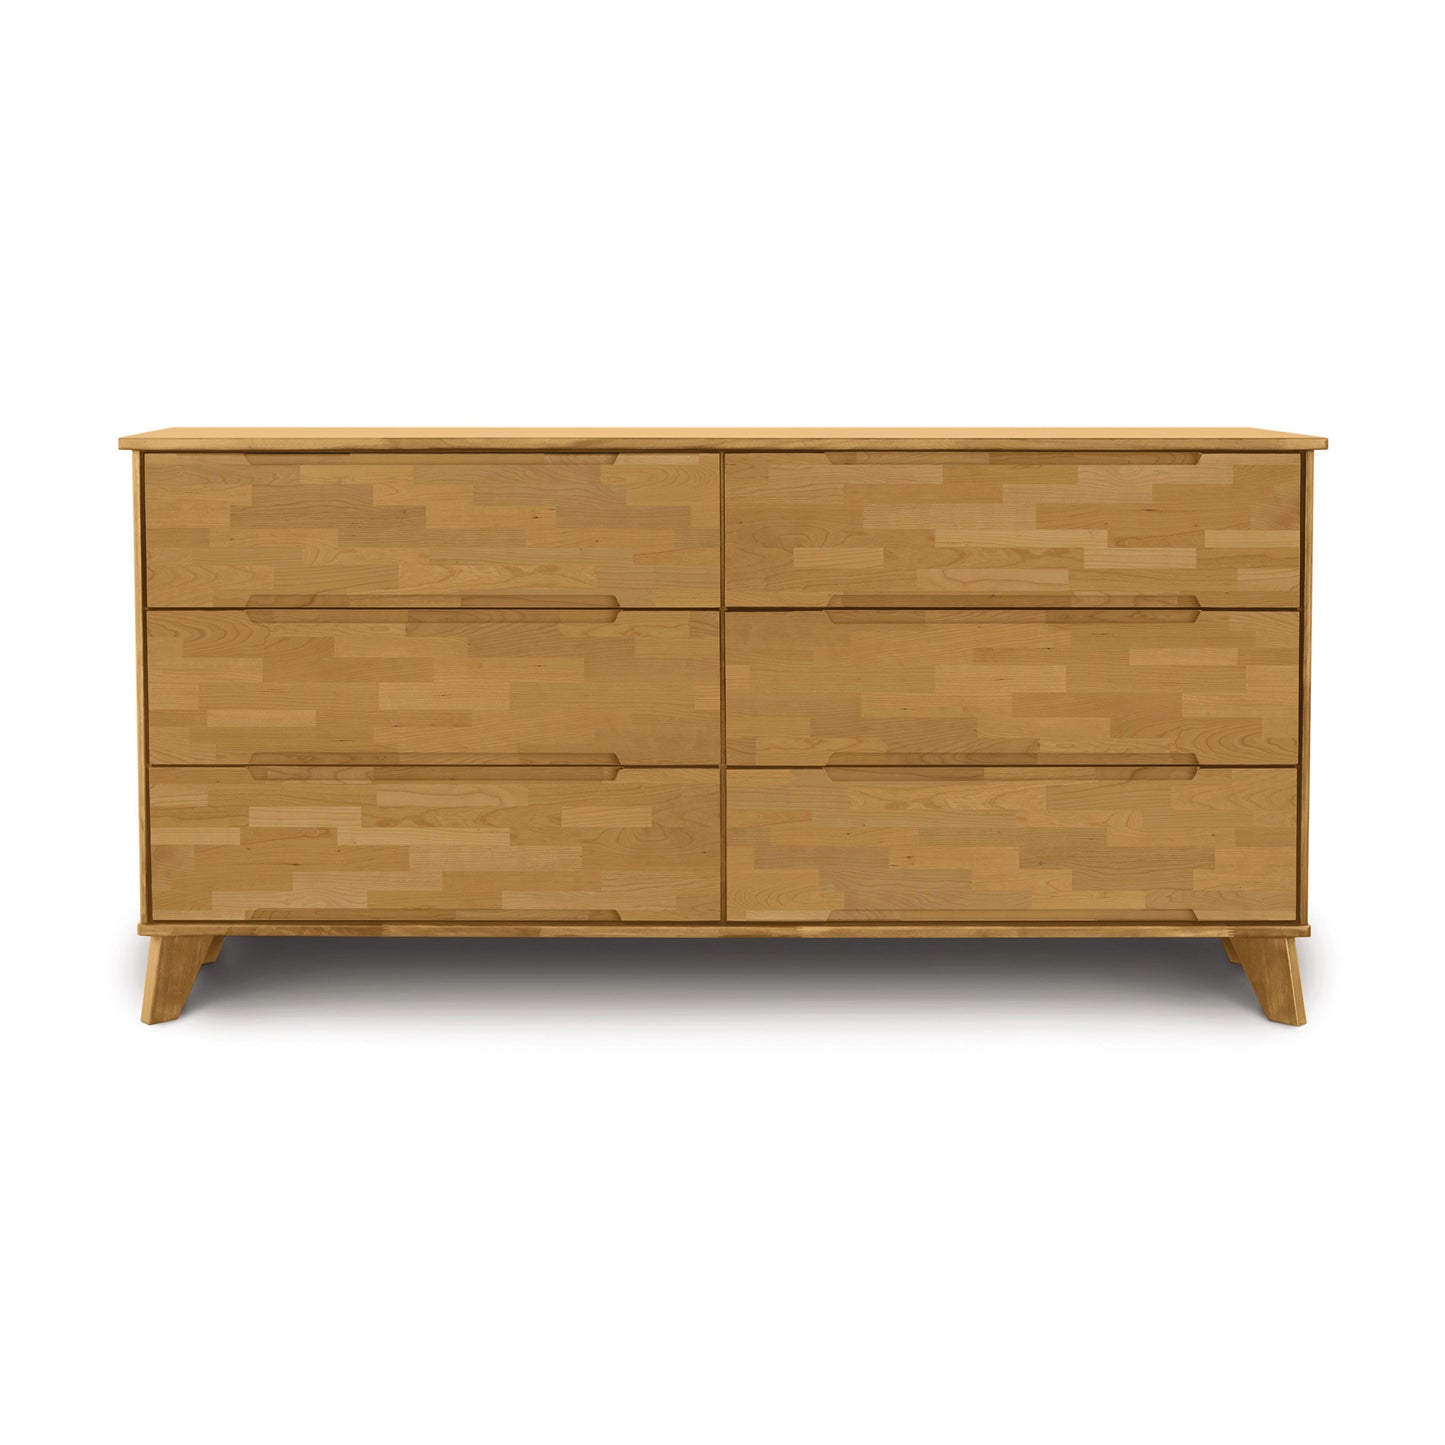 A mid-century modern Linn 6-Drawer Dresser by Copeland Furniture with drawers on a white background.